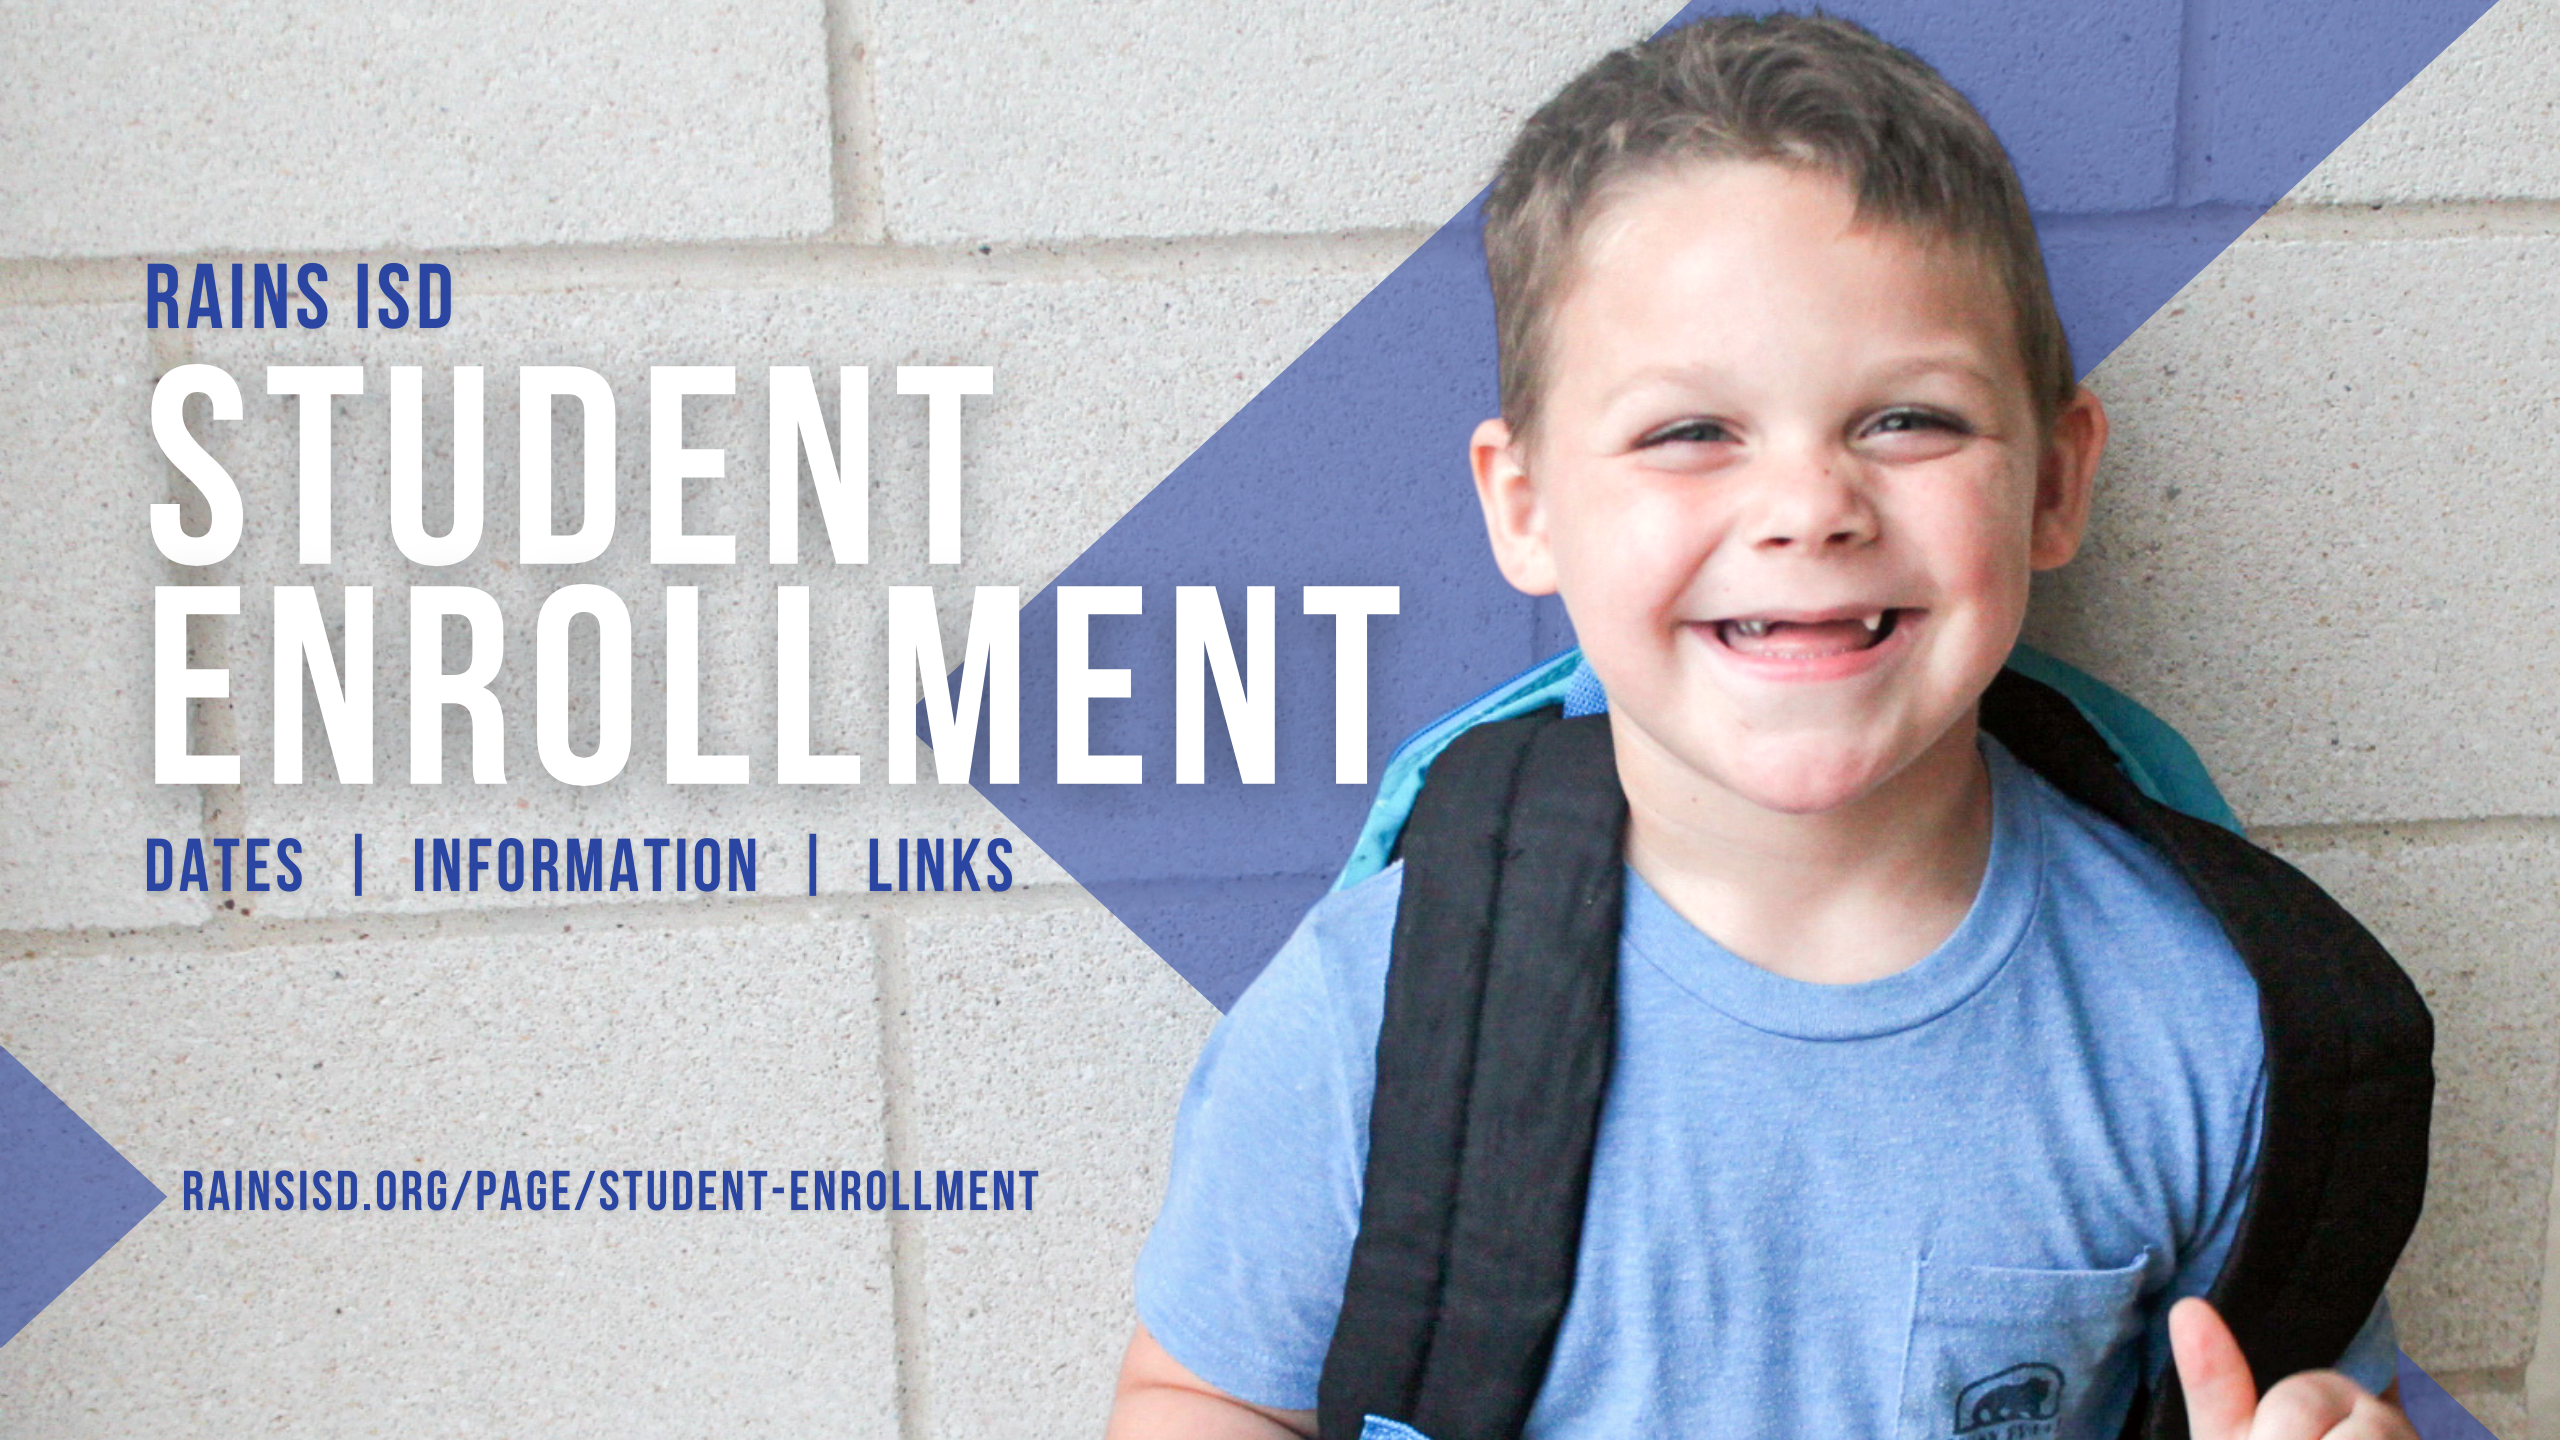 child smiling in front of brick wall with text overlay: Rains ISD Student Enrollment dates/information/links